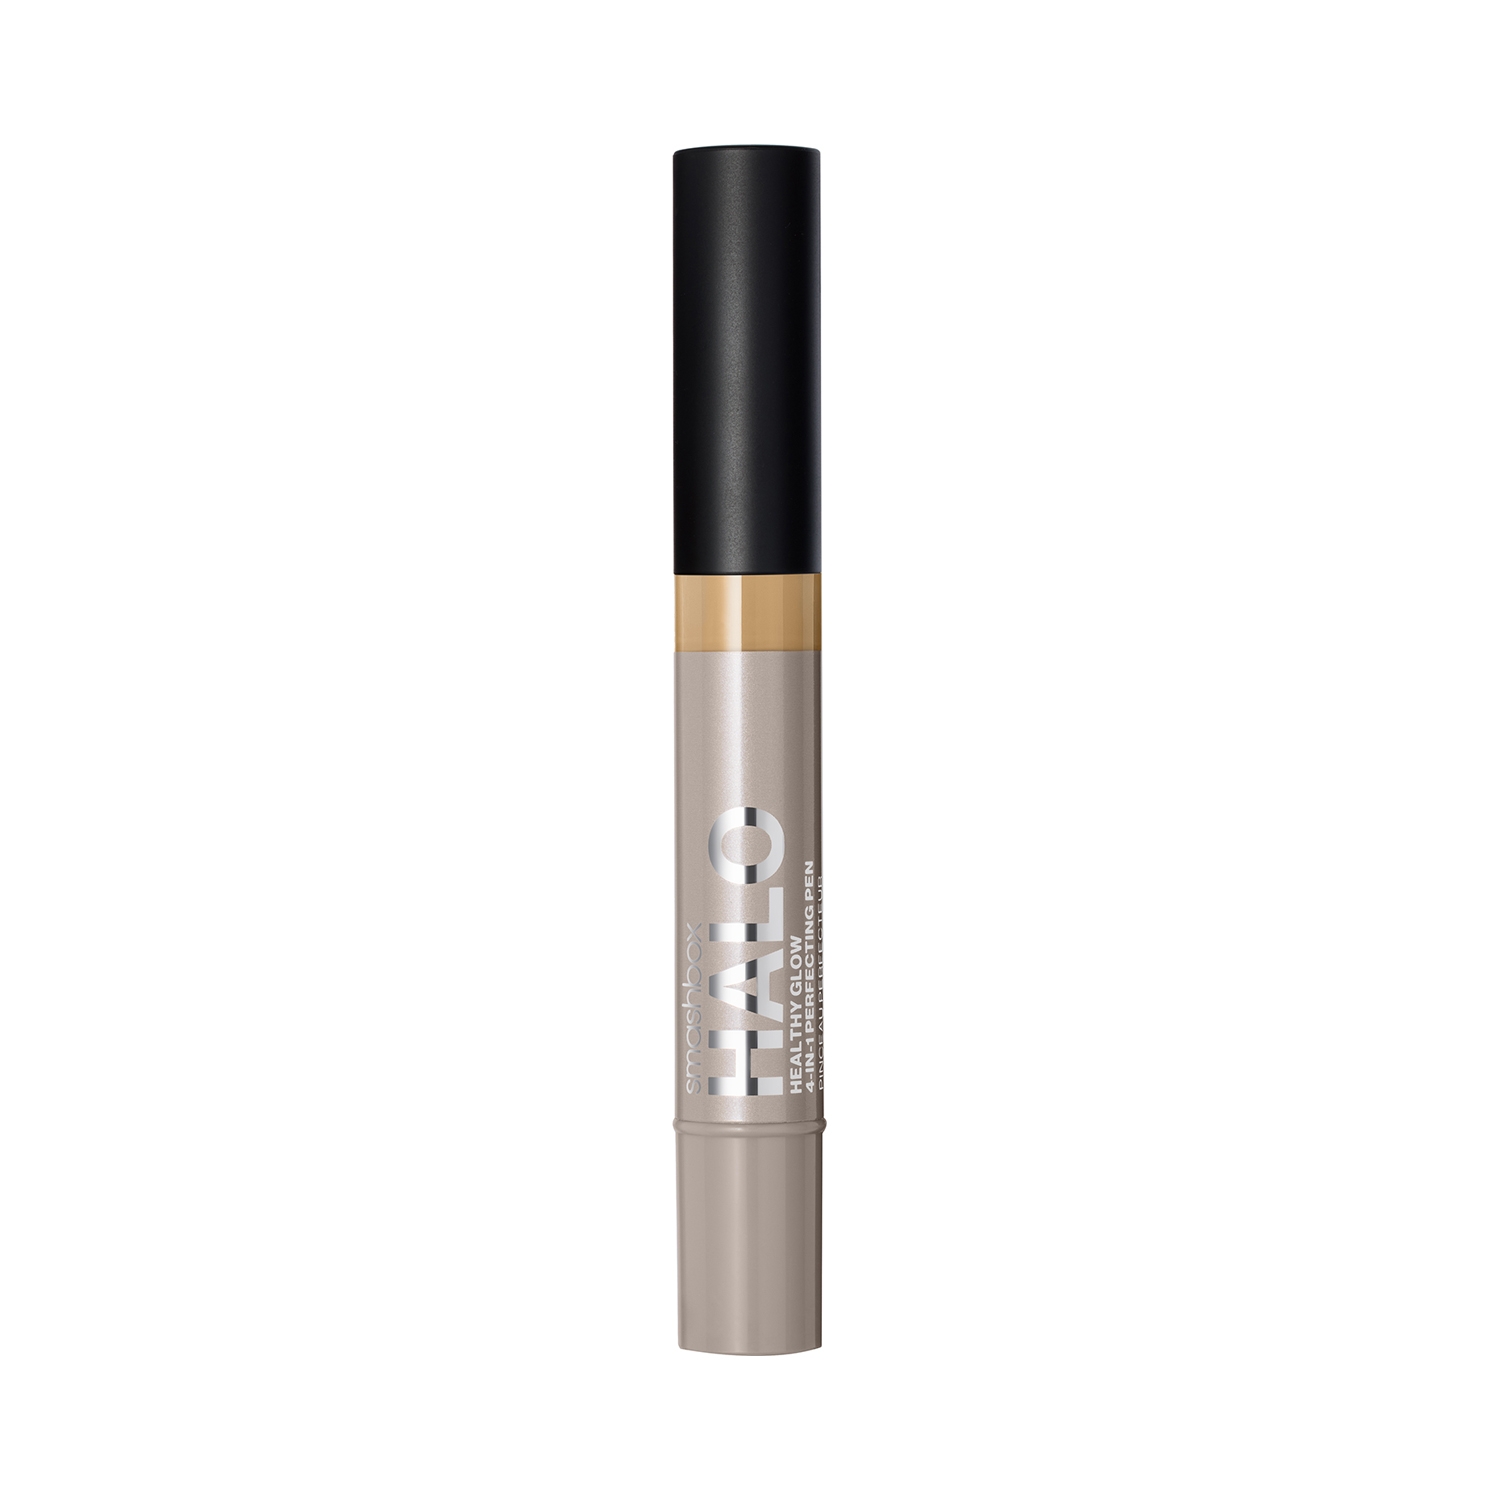 Smashbox | Smashbox Halo Healthy Glow 4-In-1 Perfecting Concealer Pen - L20O (3.5ml)